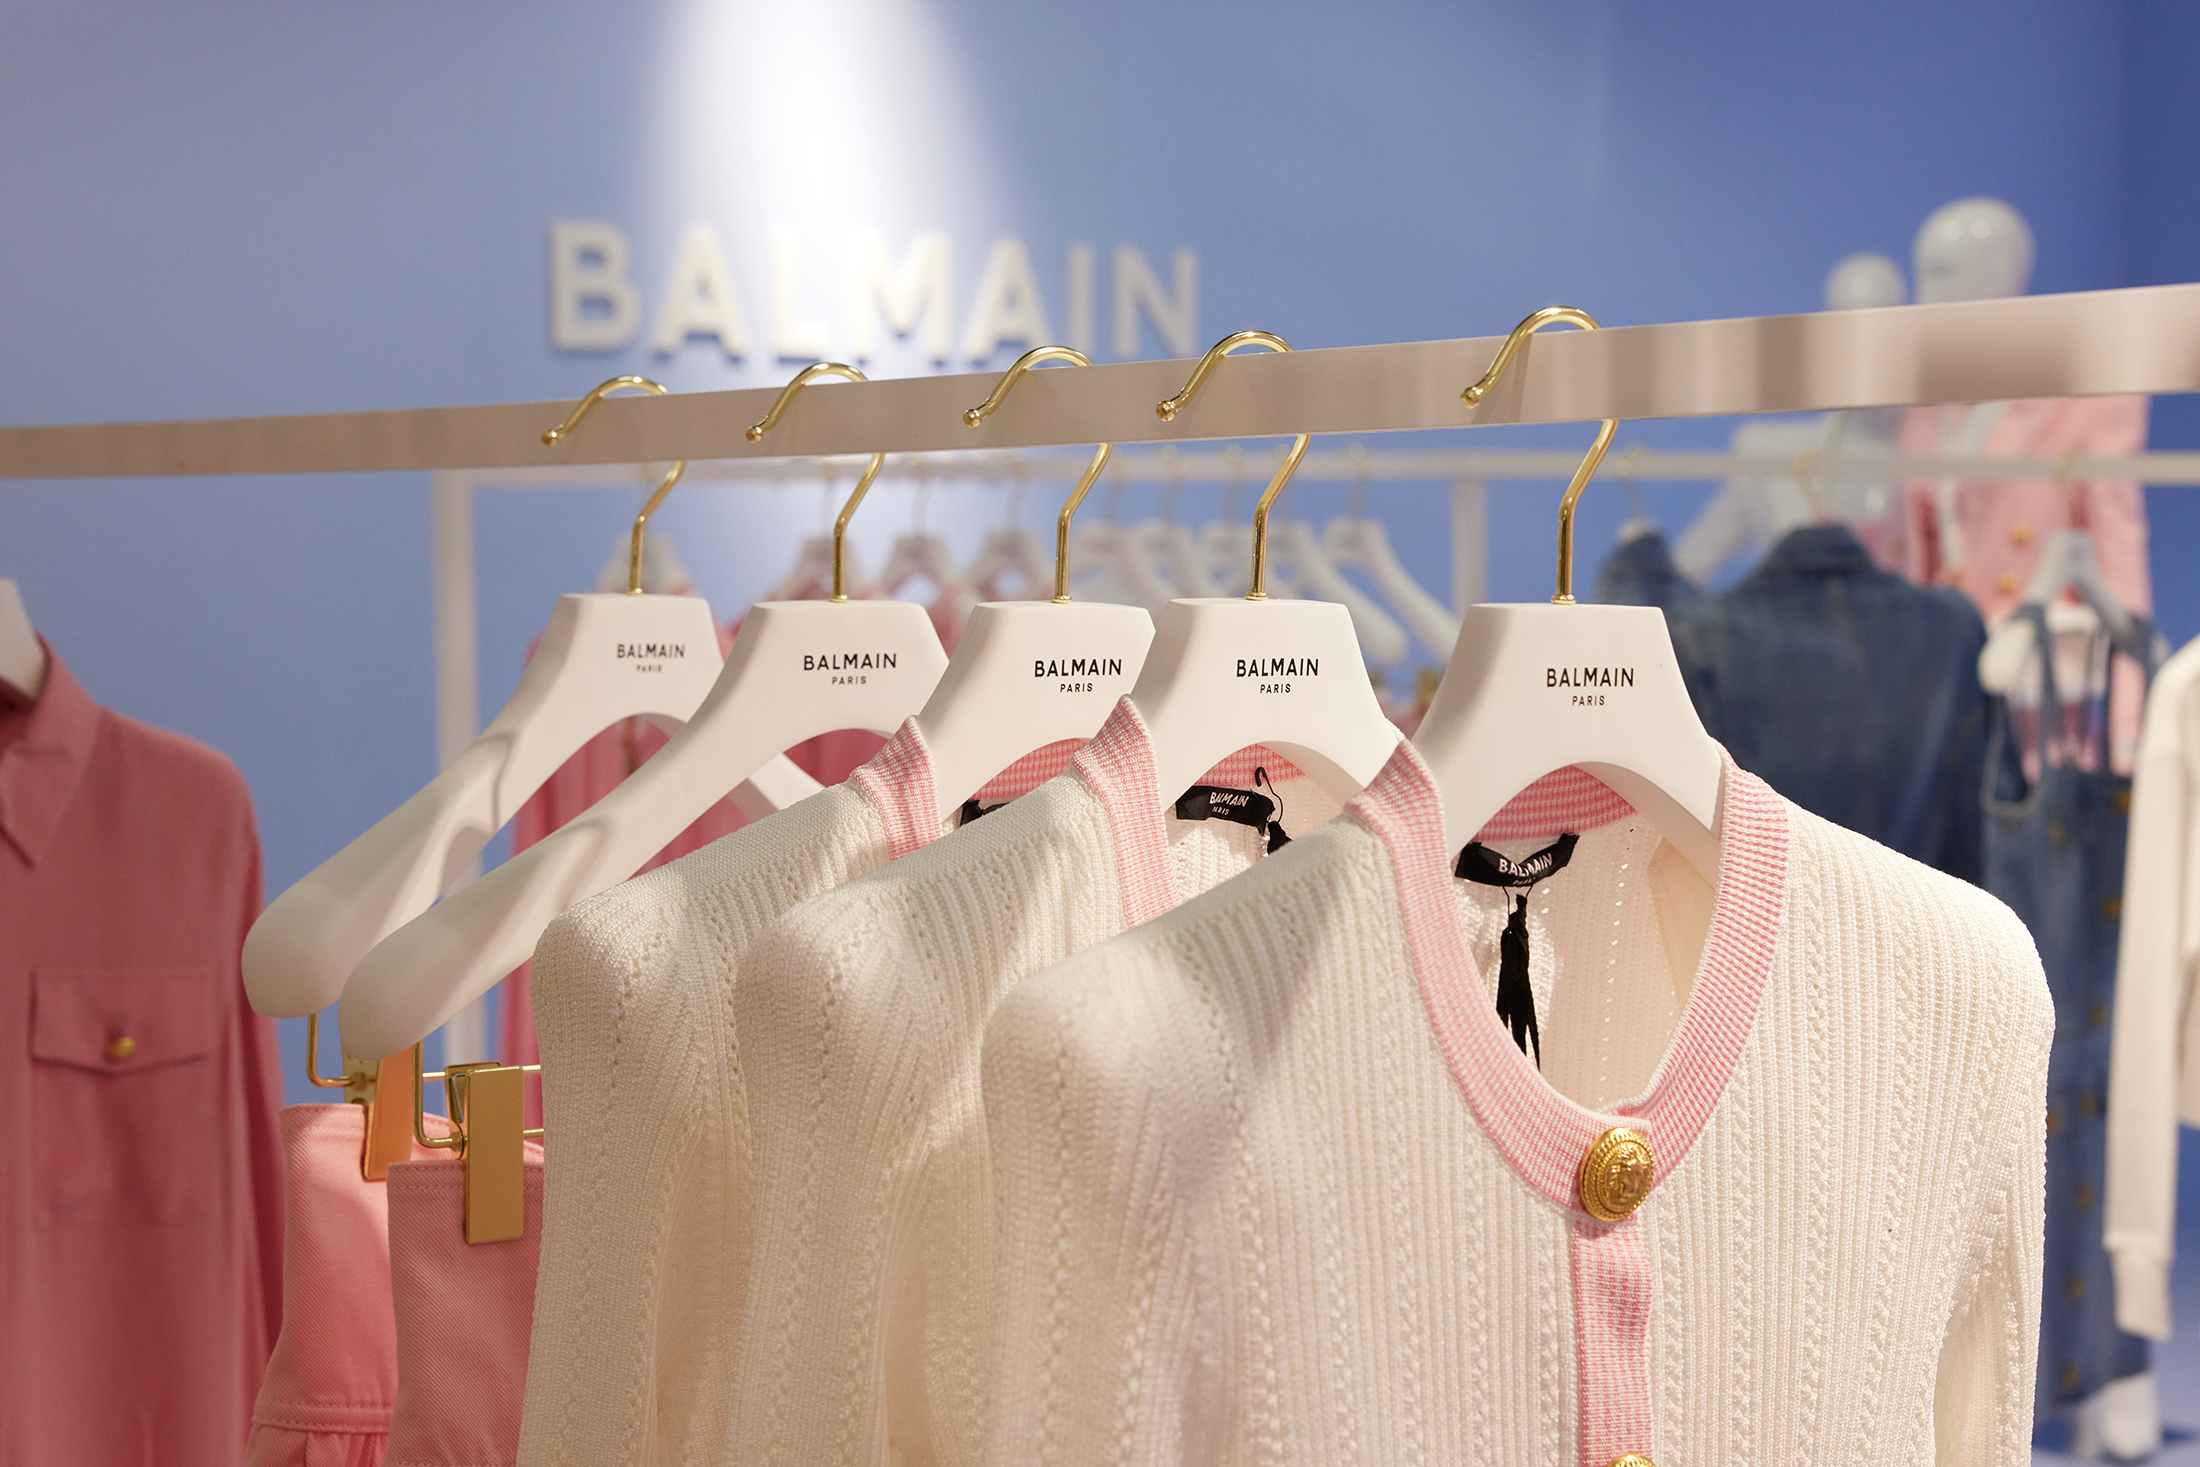 Balmain Serves Up Exclusive 'Summer Set' Activation and Collection